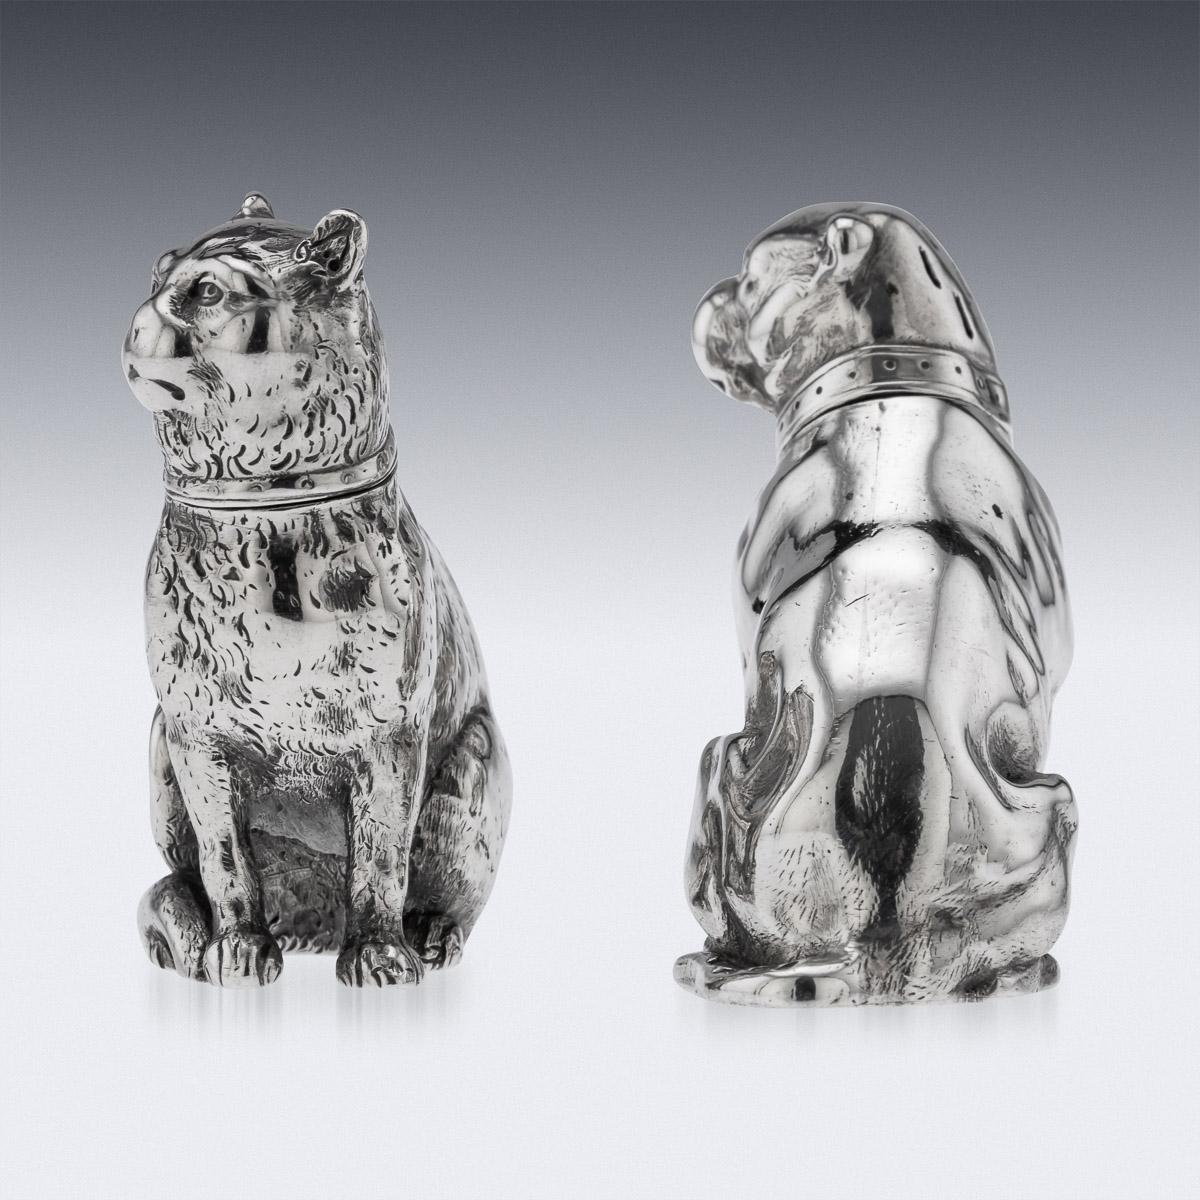 19th Century Victorian pair of novelty cast solid silver table salt & pepper, realistically modelled as a seated cat and dog, with pull off heads. Both hallmarked English silver (925 standard), London, year 1876 (A), Maker EHS (Edward H